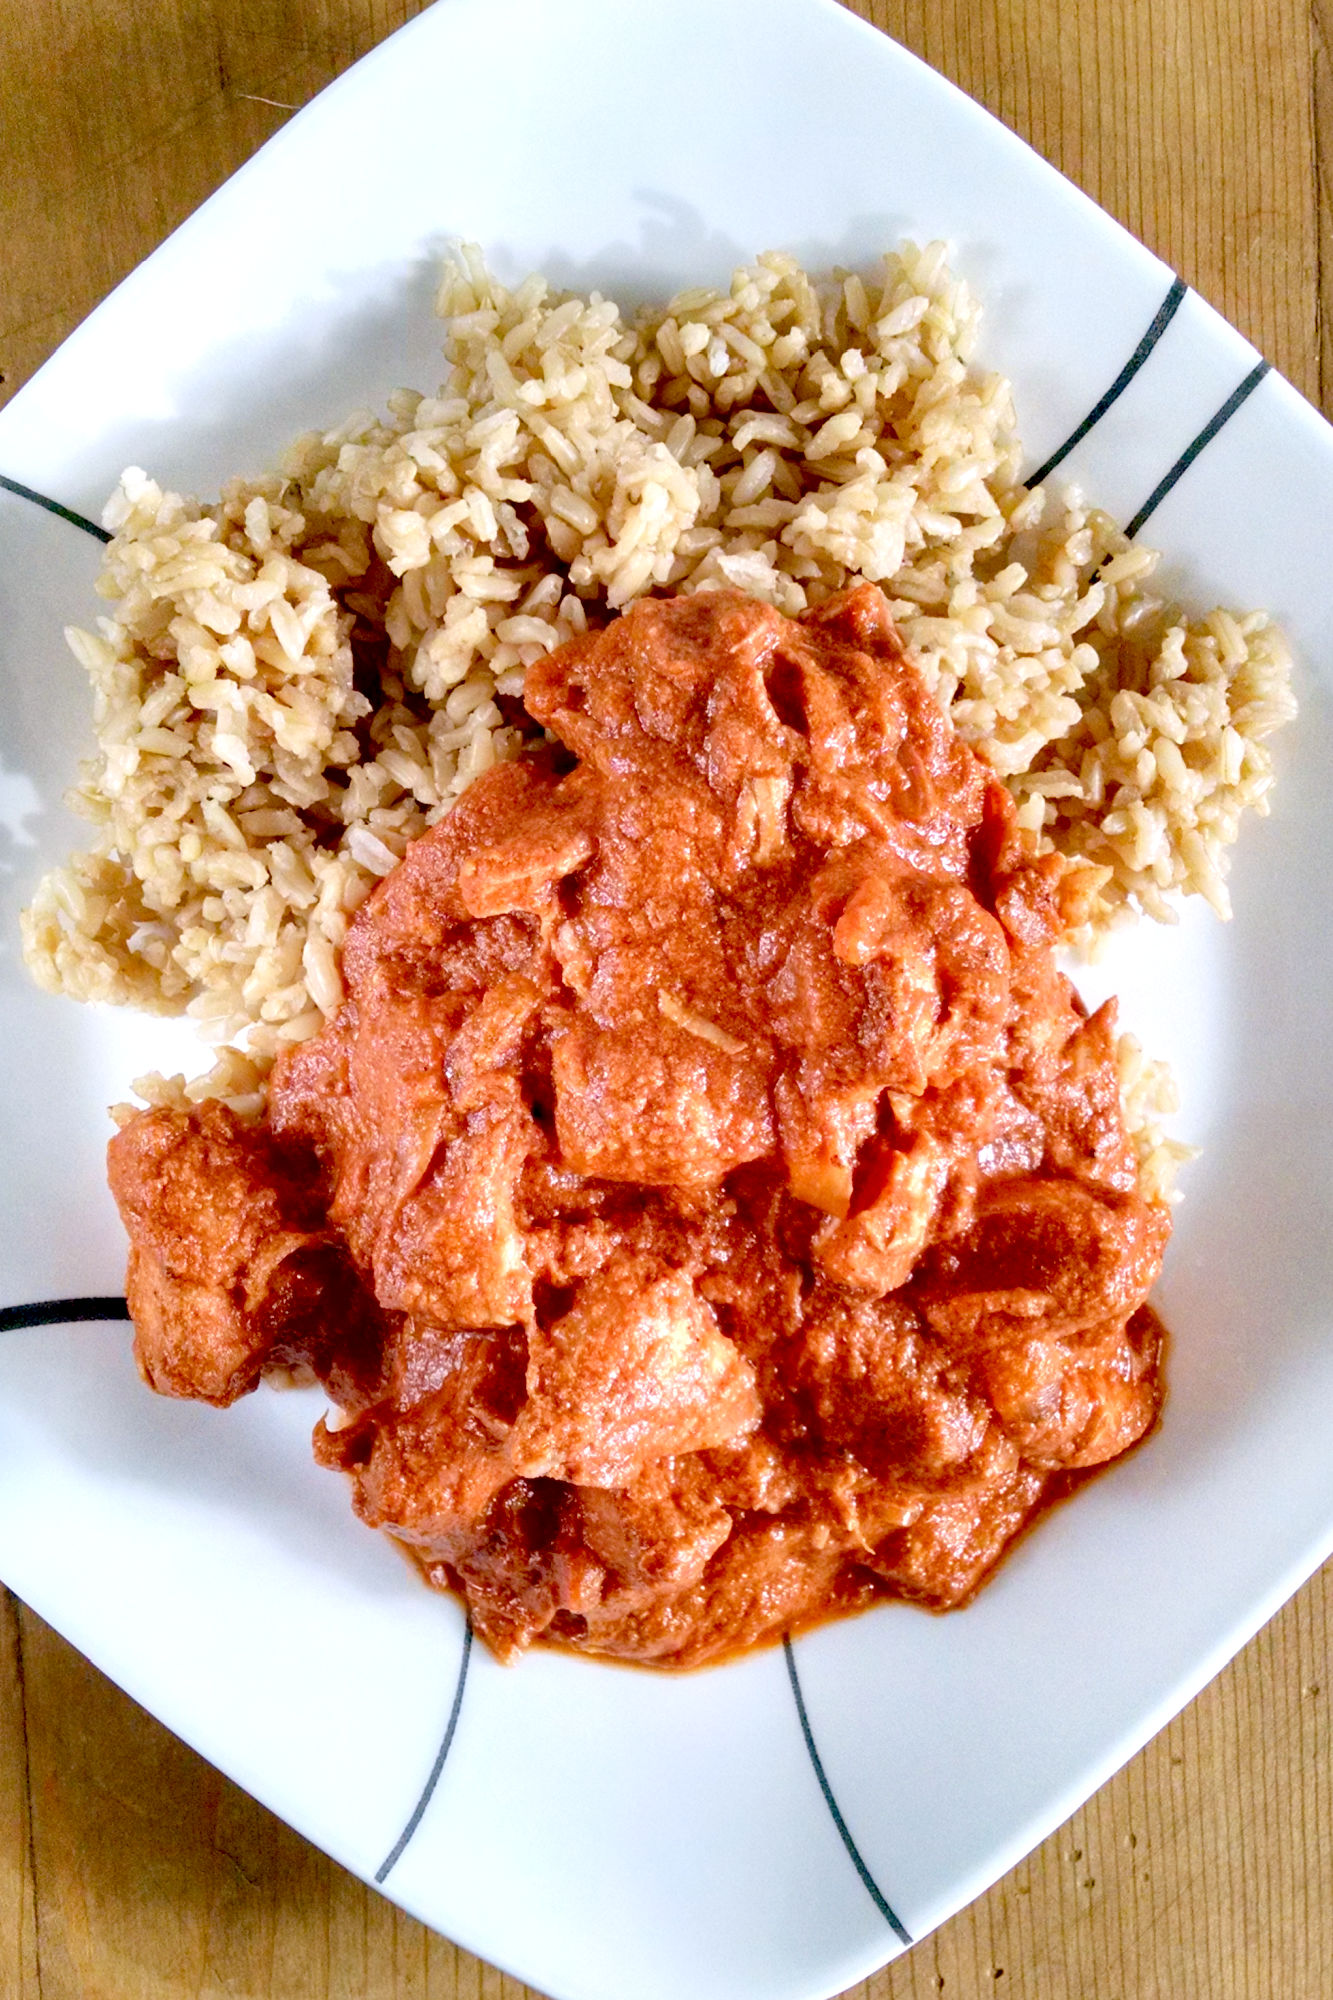 Turn up the heat with this mouthwatering slow cooker chicken tikka masala recipe! Perfect for busy weeknights or lazy Sundays. #OurFamilyTable #SpiceUpYourDinner #CrockpotCooking #EasyIndianRecipes #DinnerMadeEasy #DeliciousDinnerIdeas
